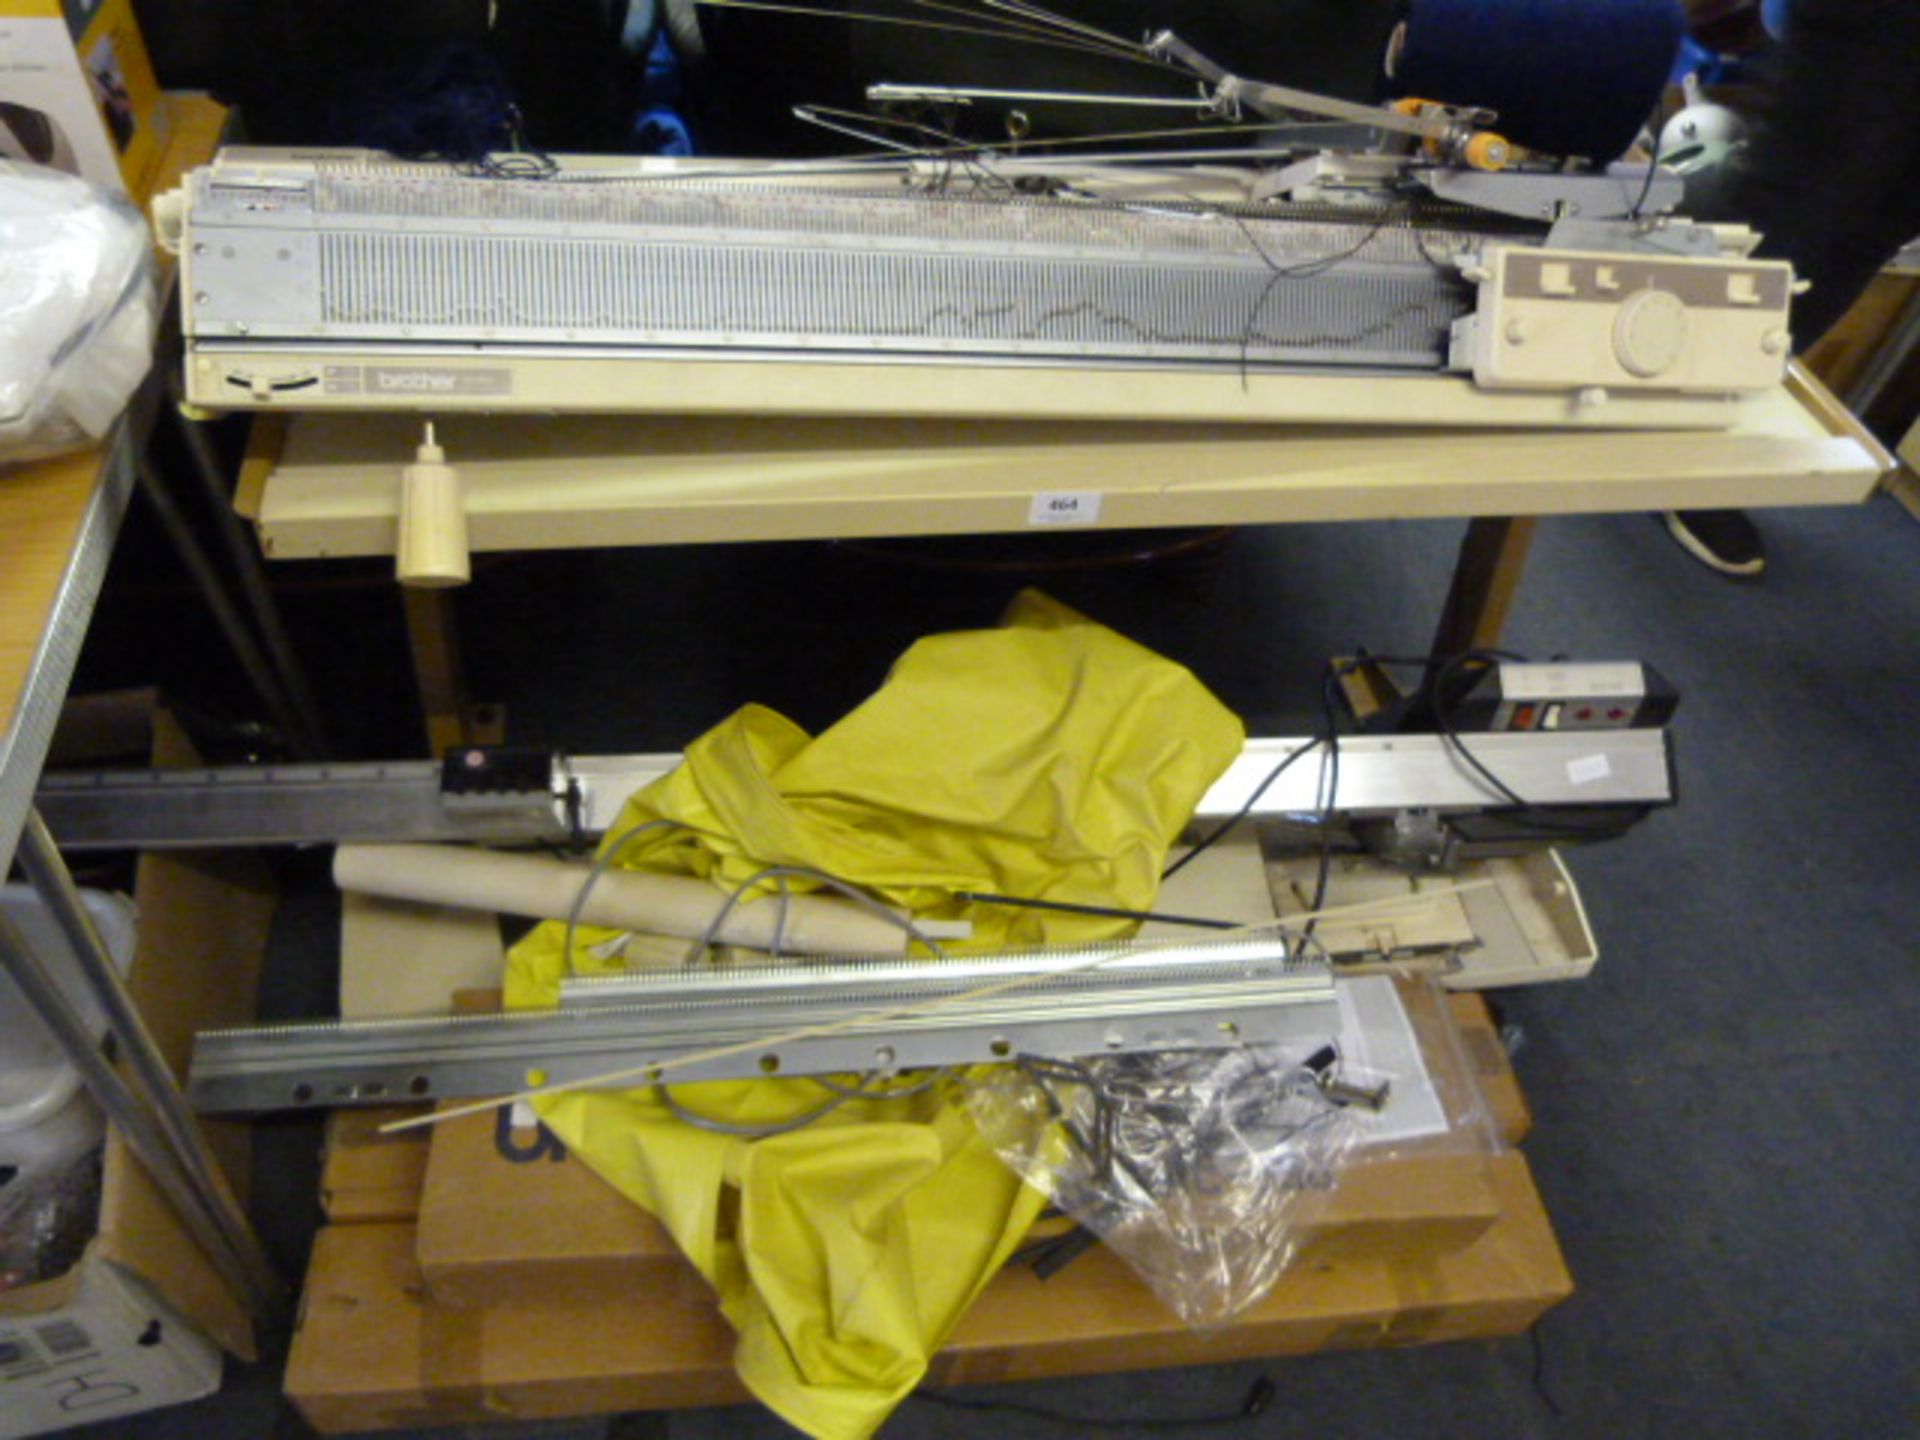 Knitting Machine with Accessories